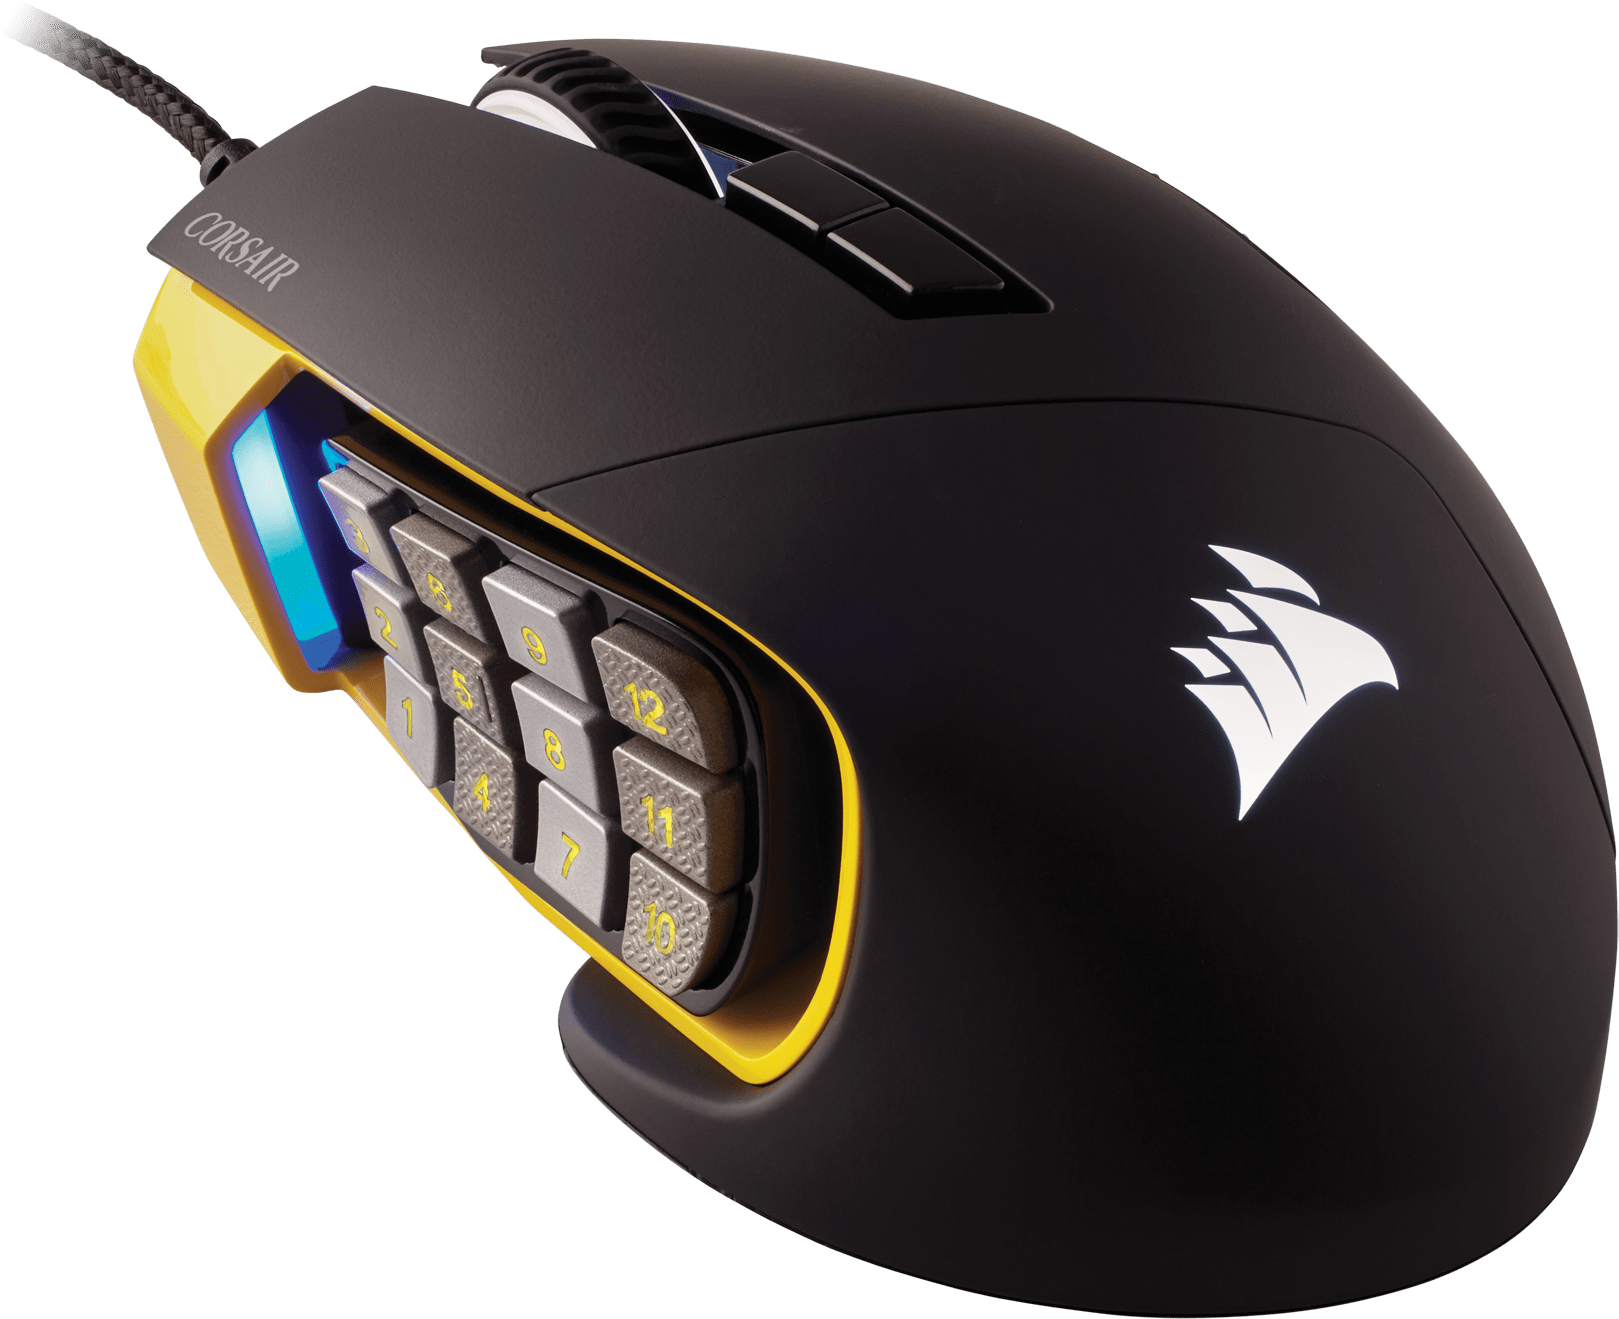 MM4 gaming mouse